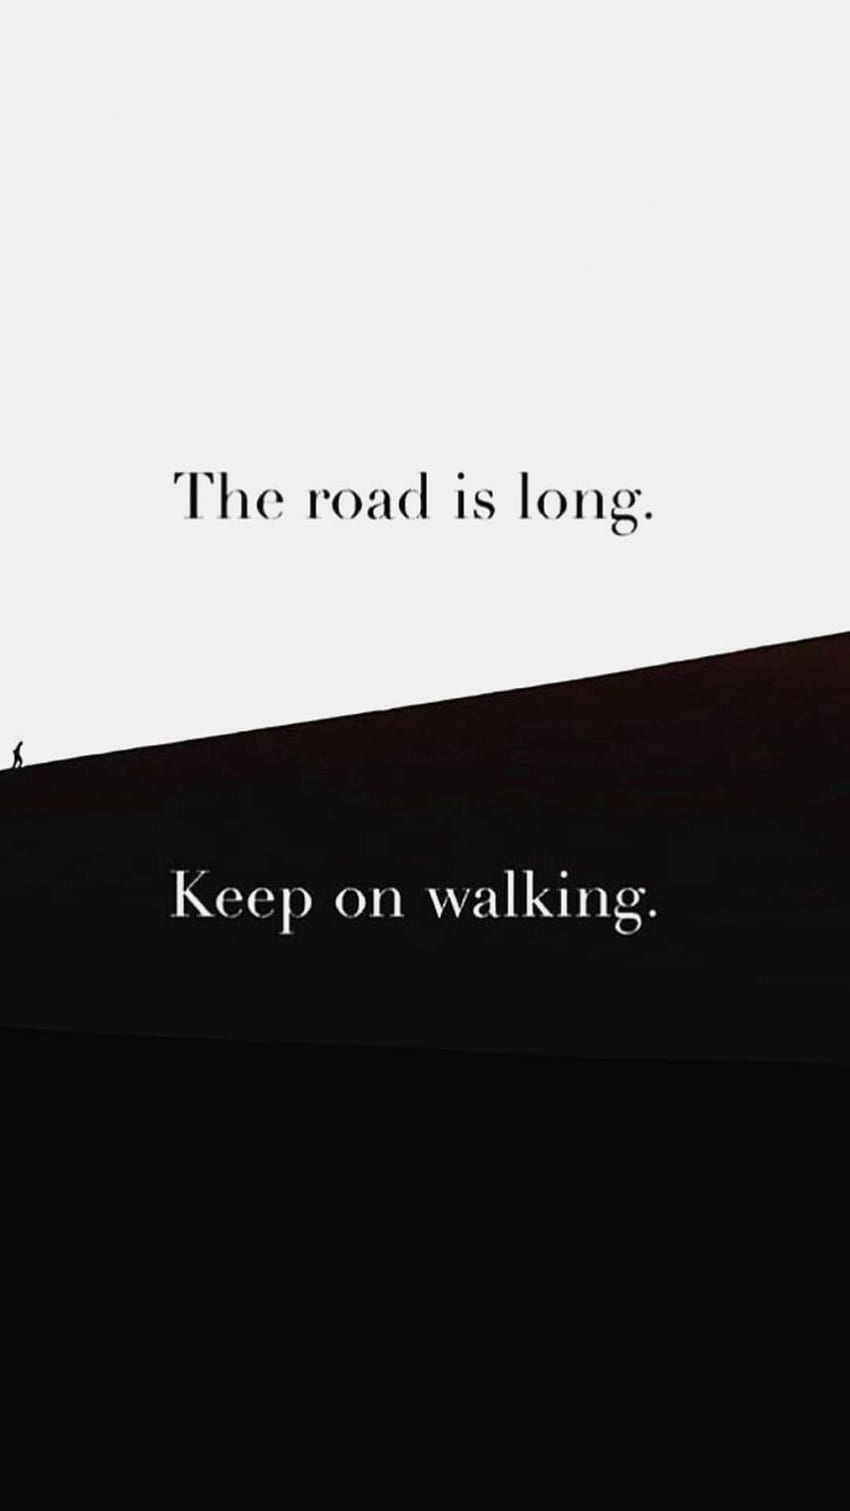 The road is long. Keep on walking. - Positive